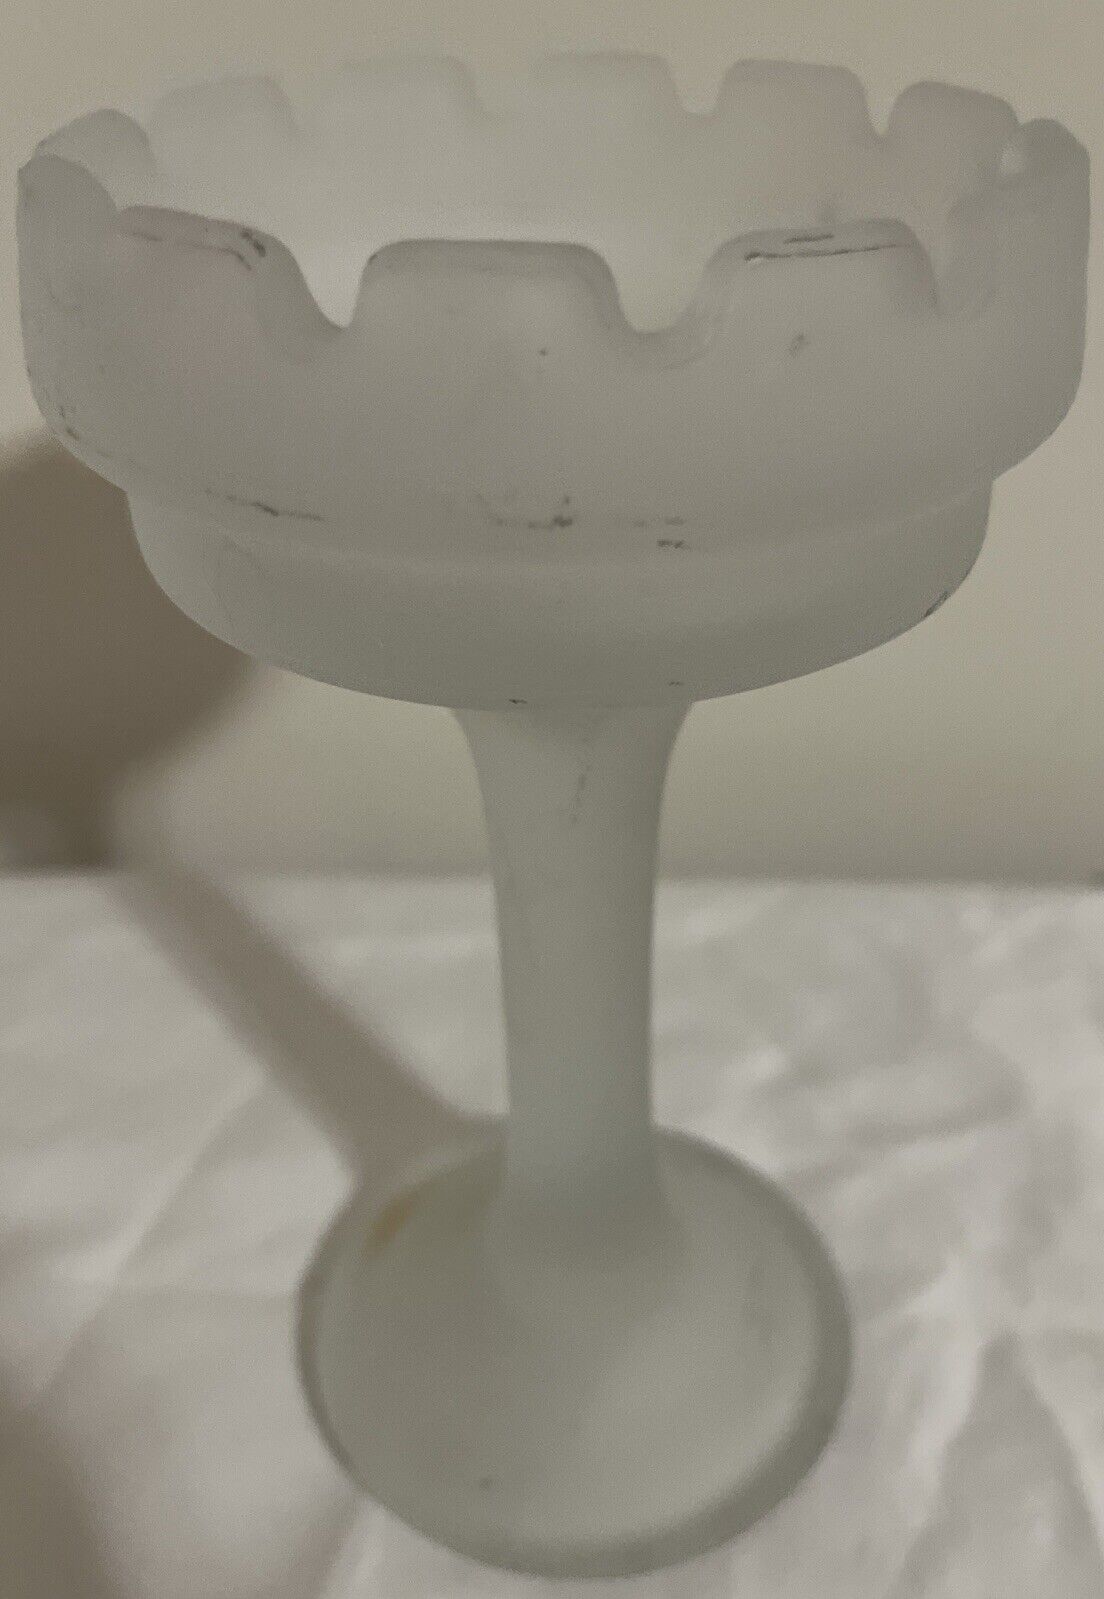 Partylite Satin Frosted Glass Castle Turret Candle Holder